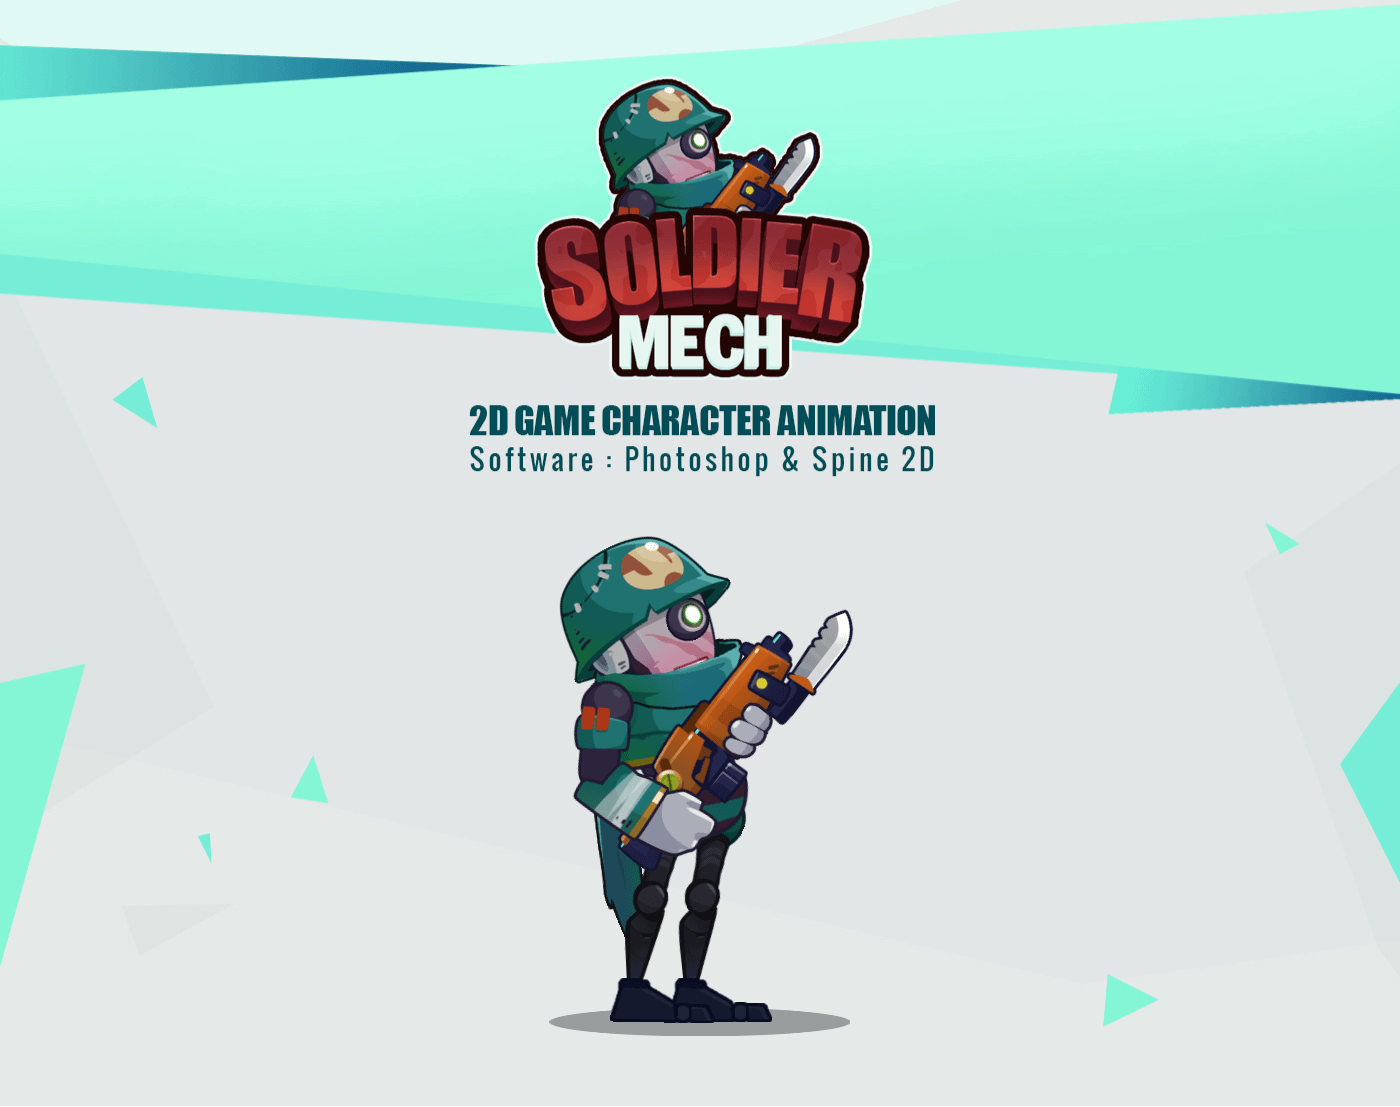 ArtStation - Spine 2D Animation - Mech Soldier Character Animation